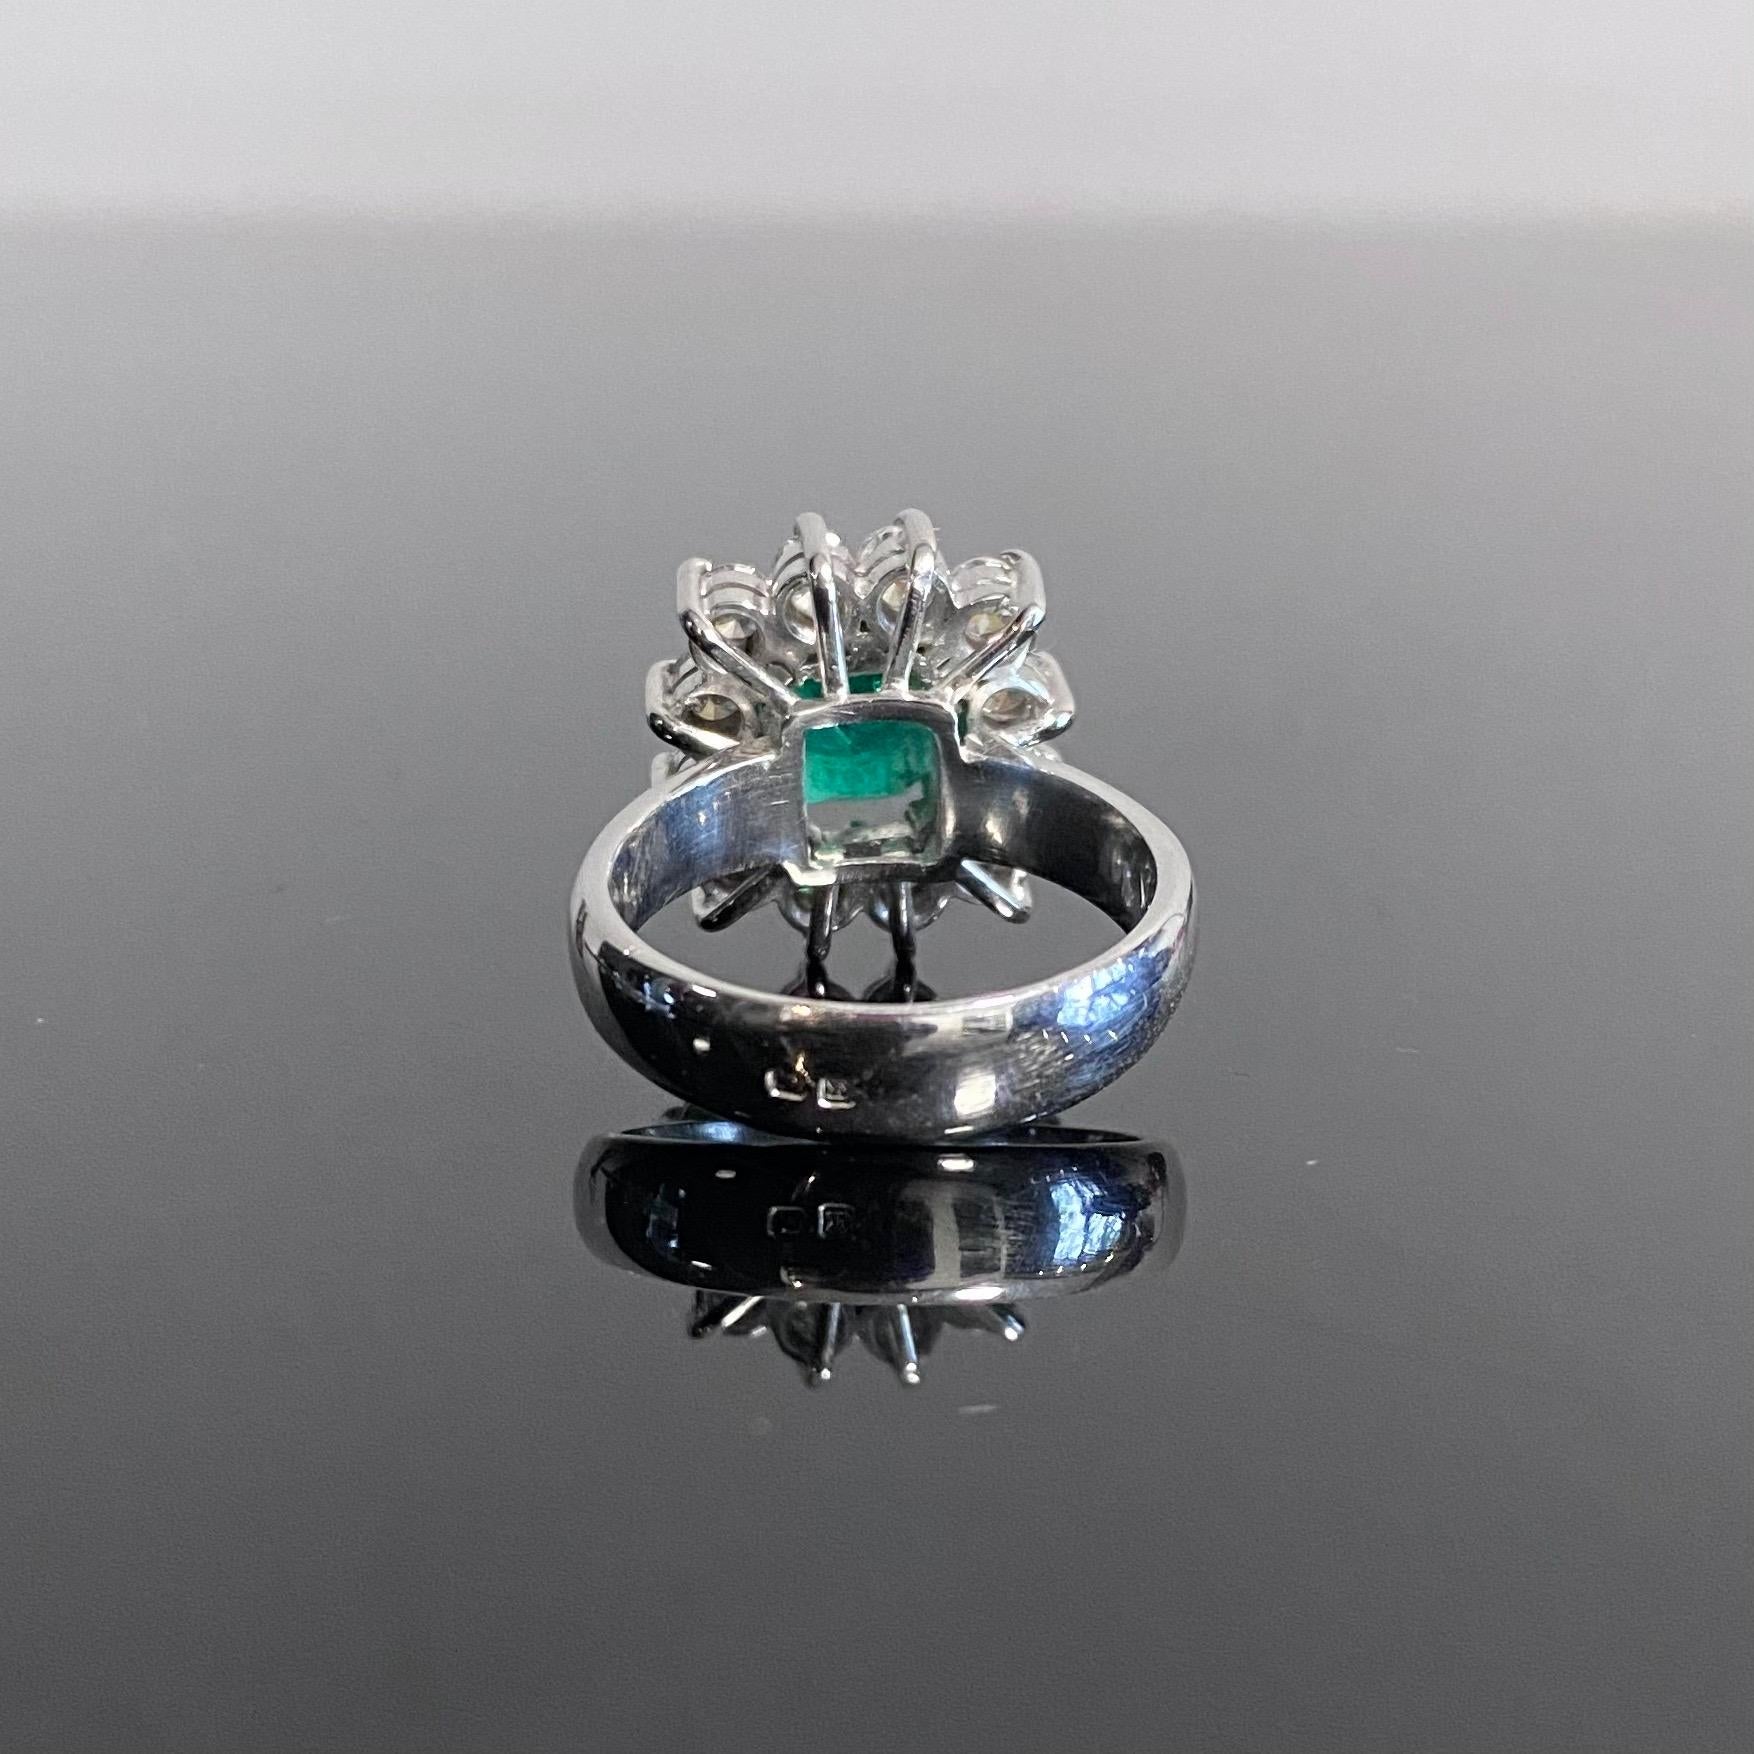 Contemporary Emerald Diamond Coronet Cluster Engagement Ring White Gold, 2010s 7